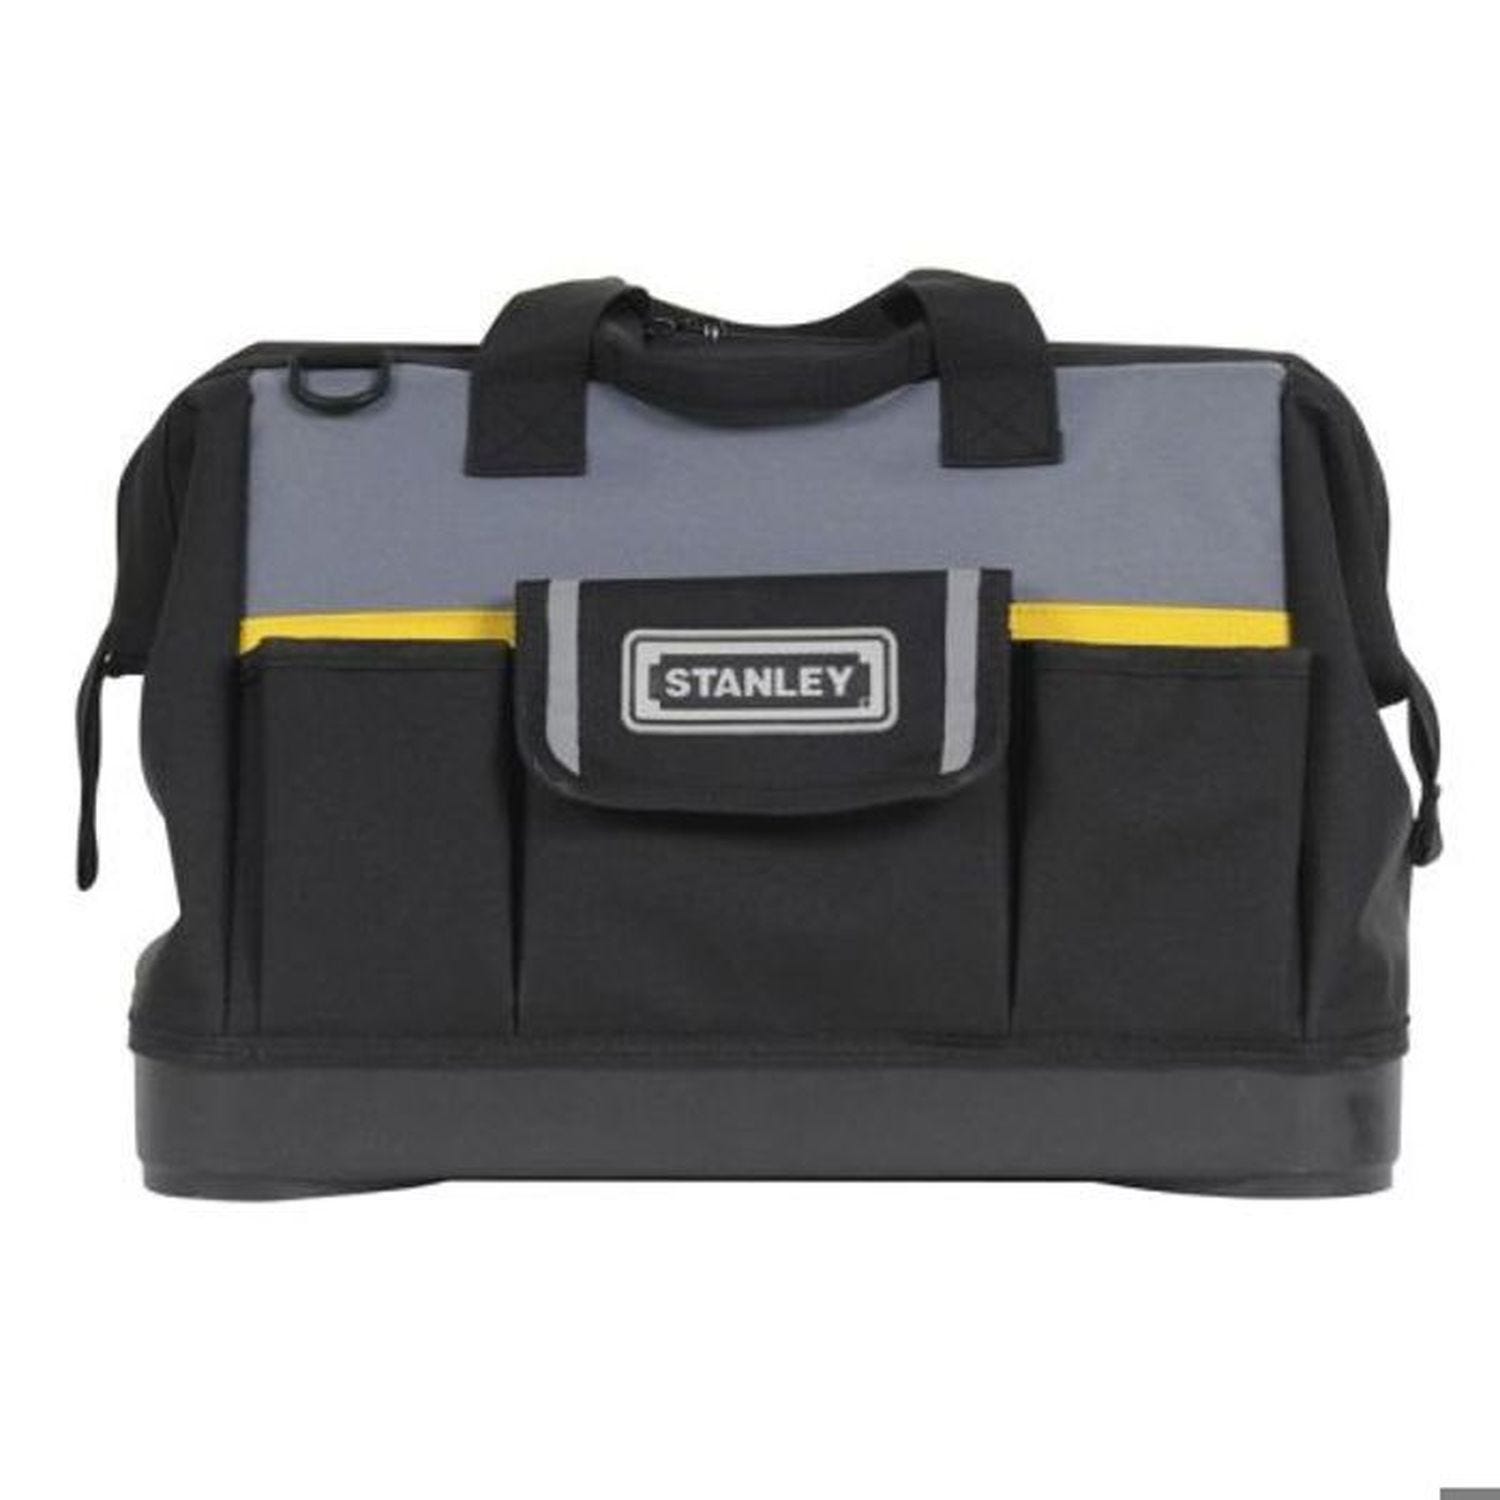 Sac porte-outils 40 cm - STANLEY - Stanley 0